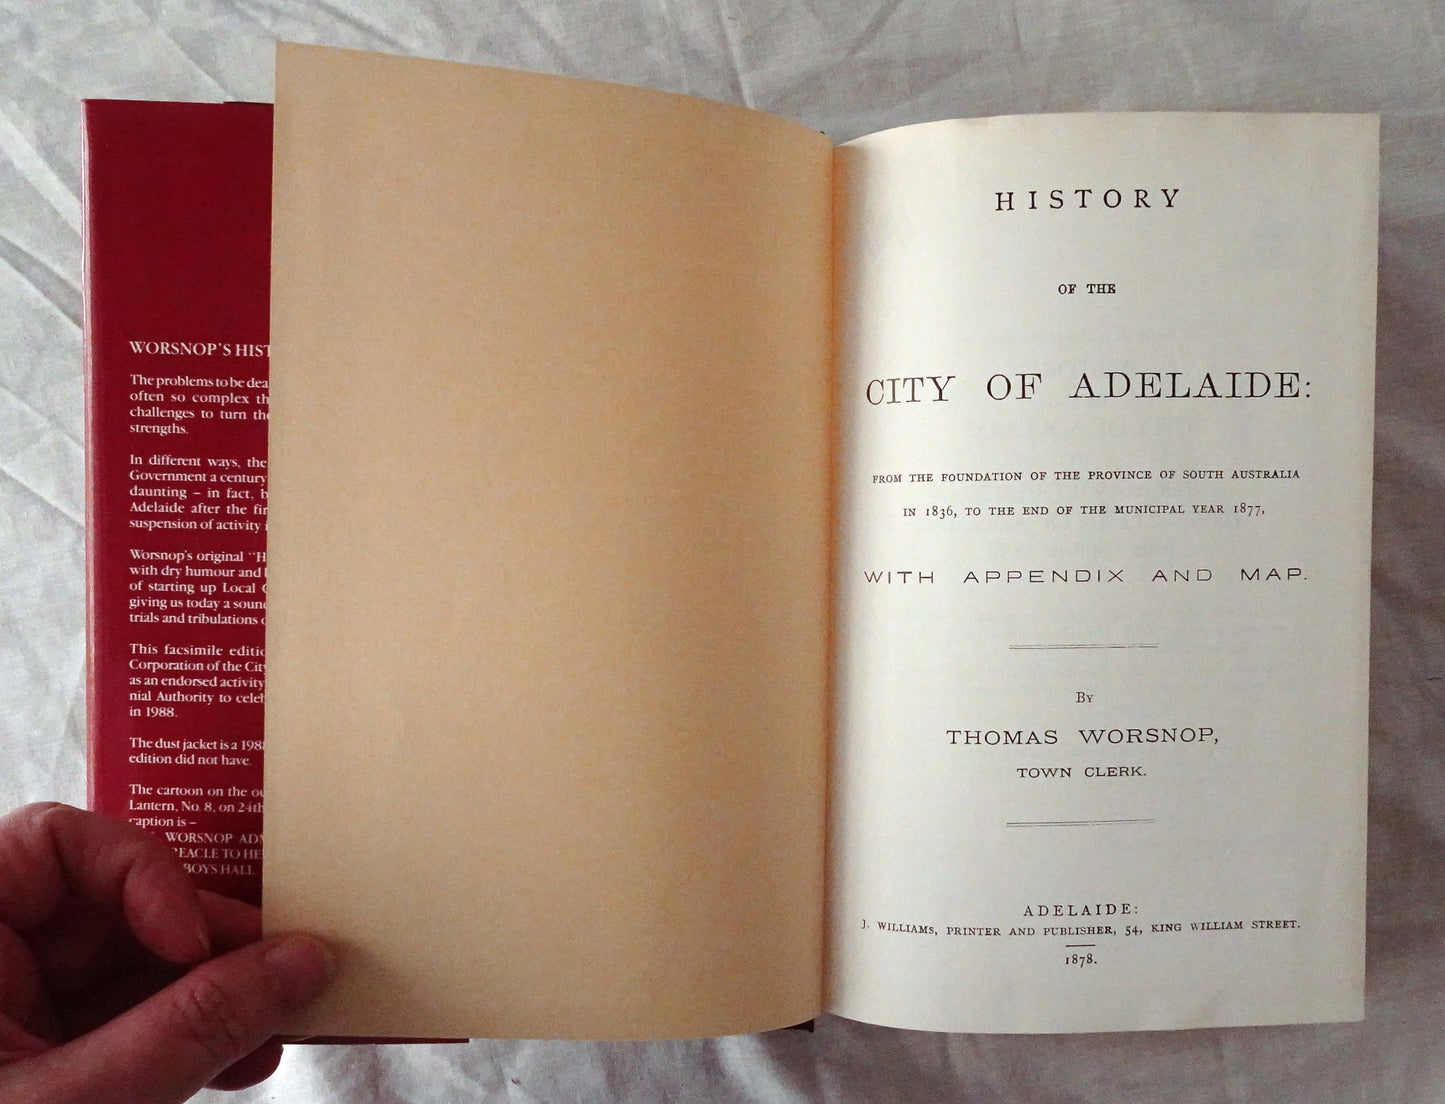 History of the City of Adelaide by Thomas Worsnop